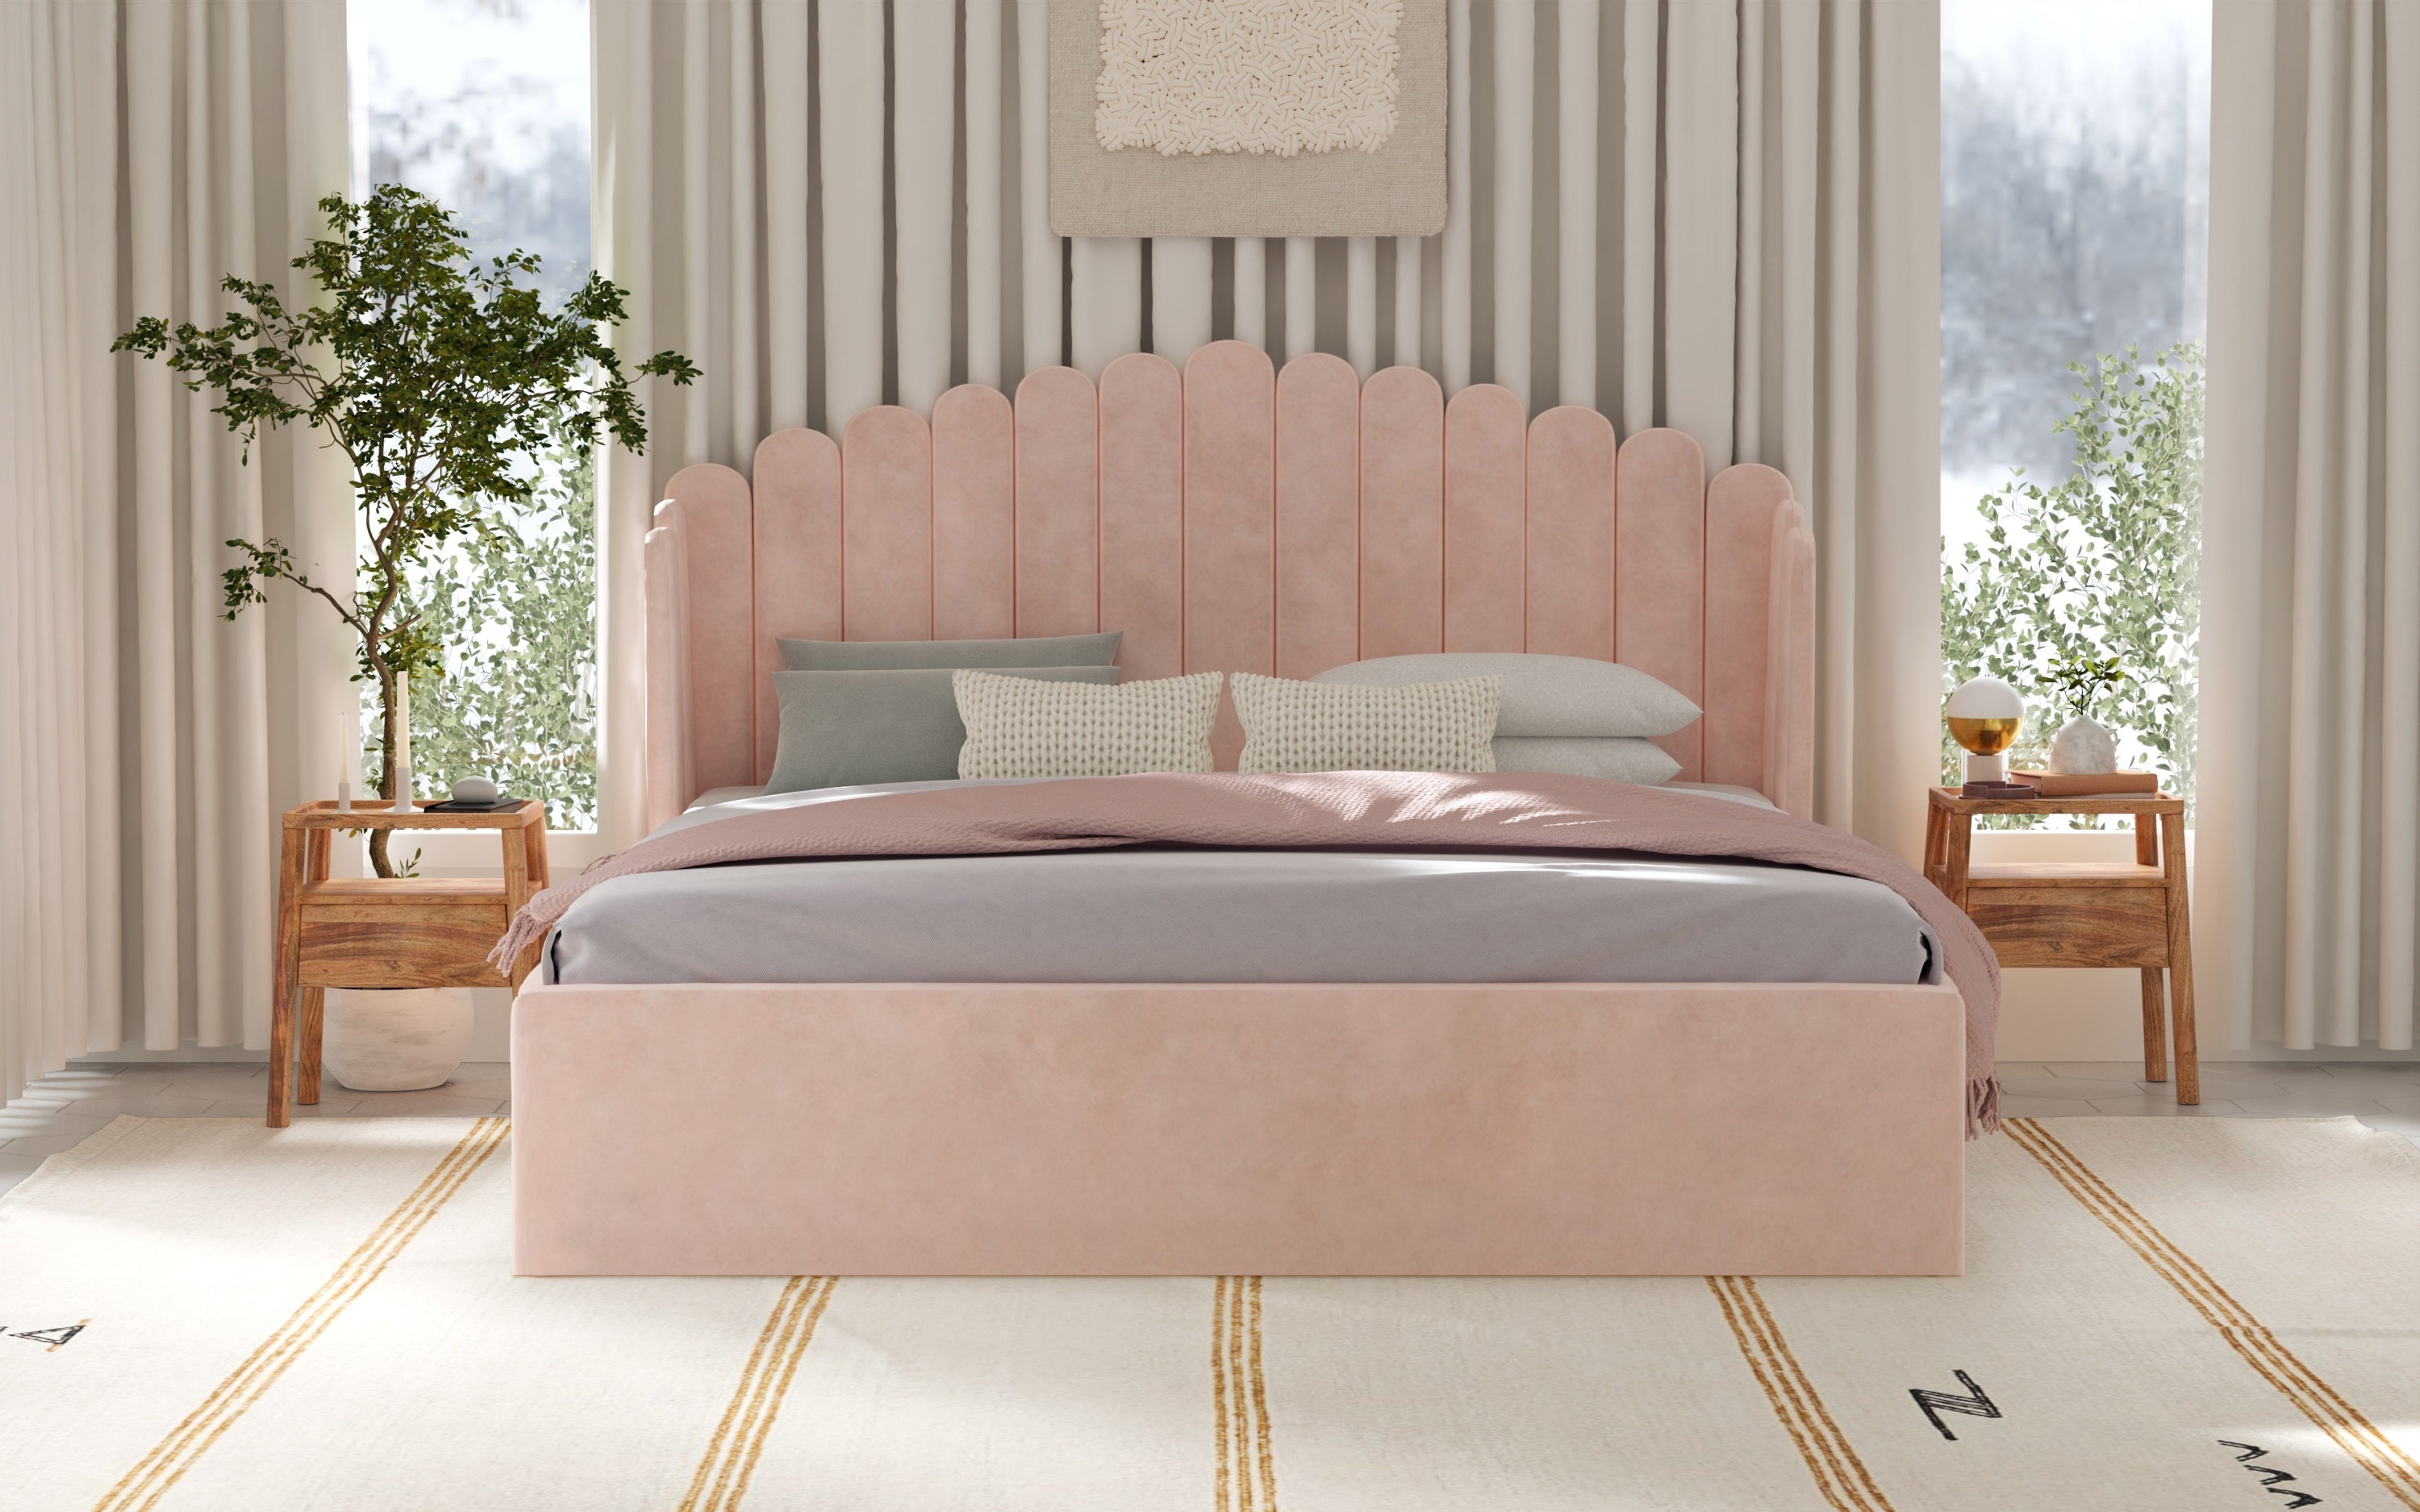 A Touch of Romance: Soft Pink and Serene Accents